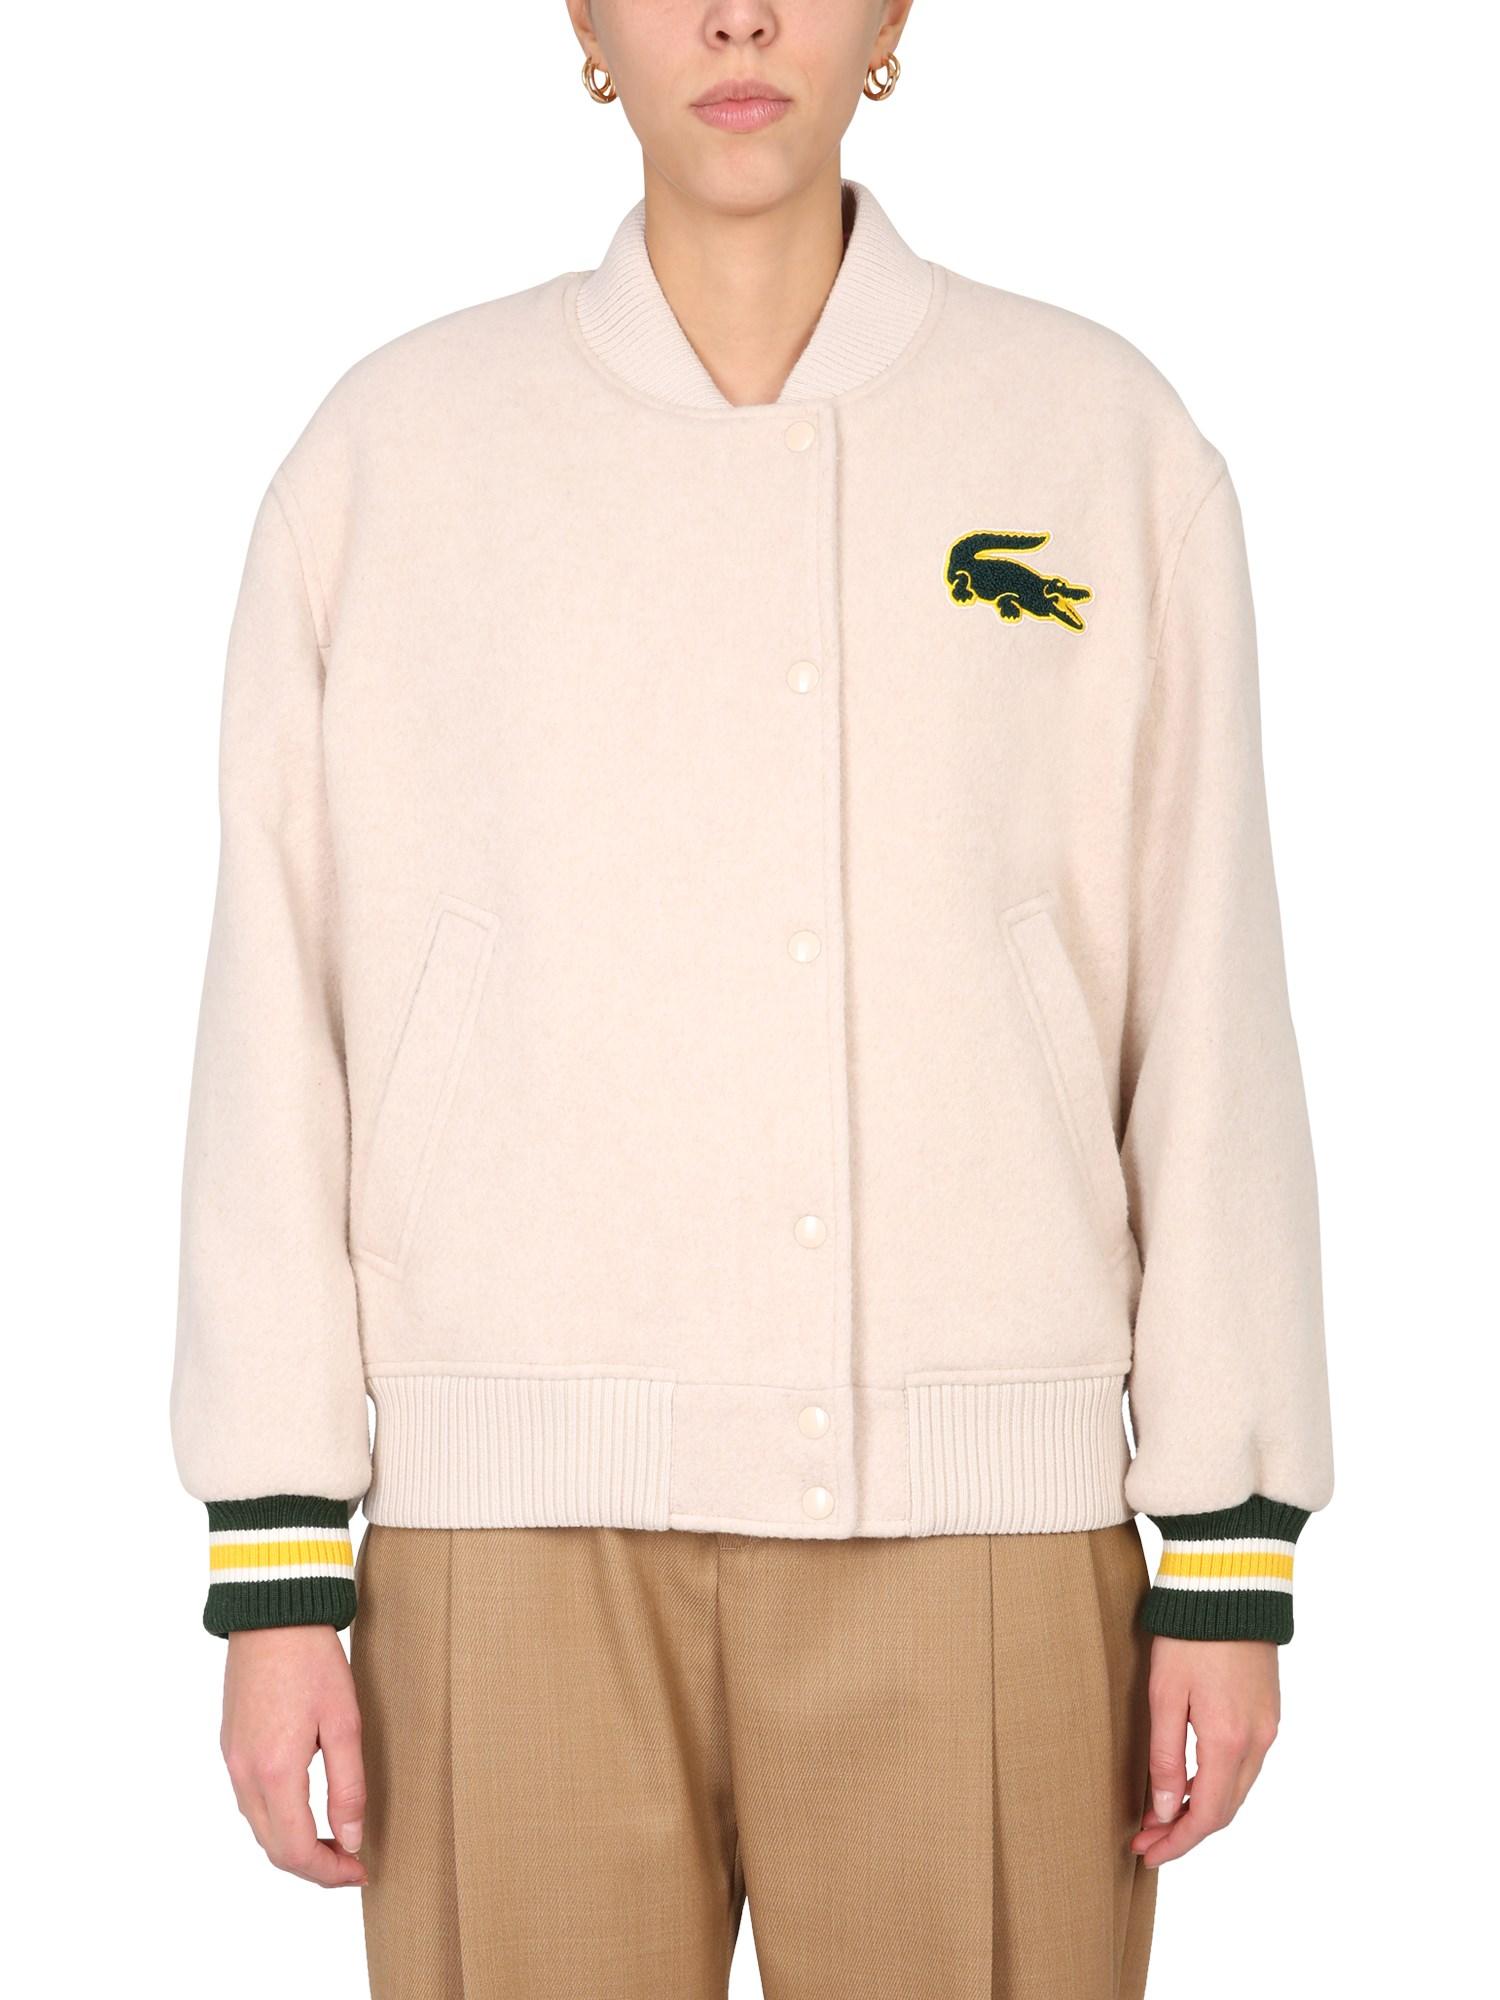 Lacoste Teddy Oversize Fit Wool Jacket With Logo in Beige (Natural) - Lyst